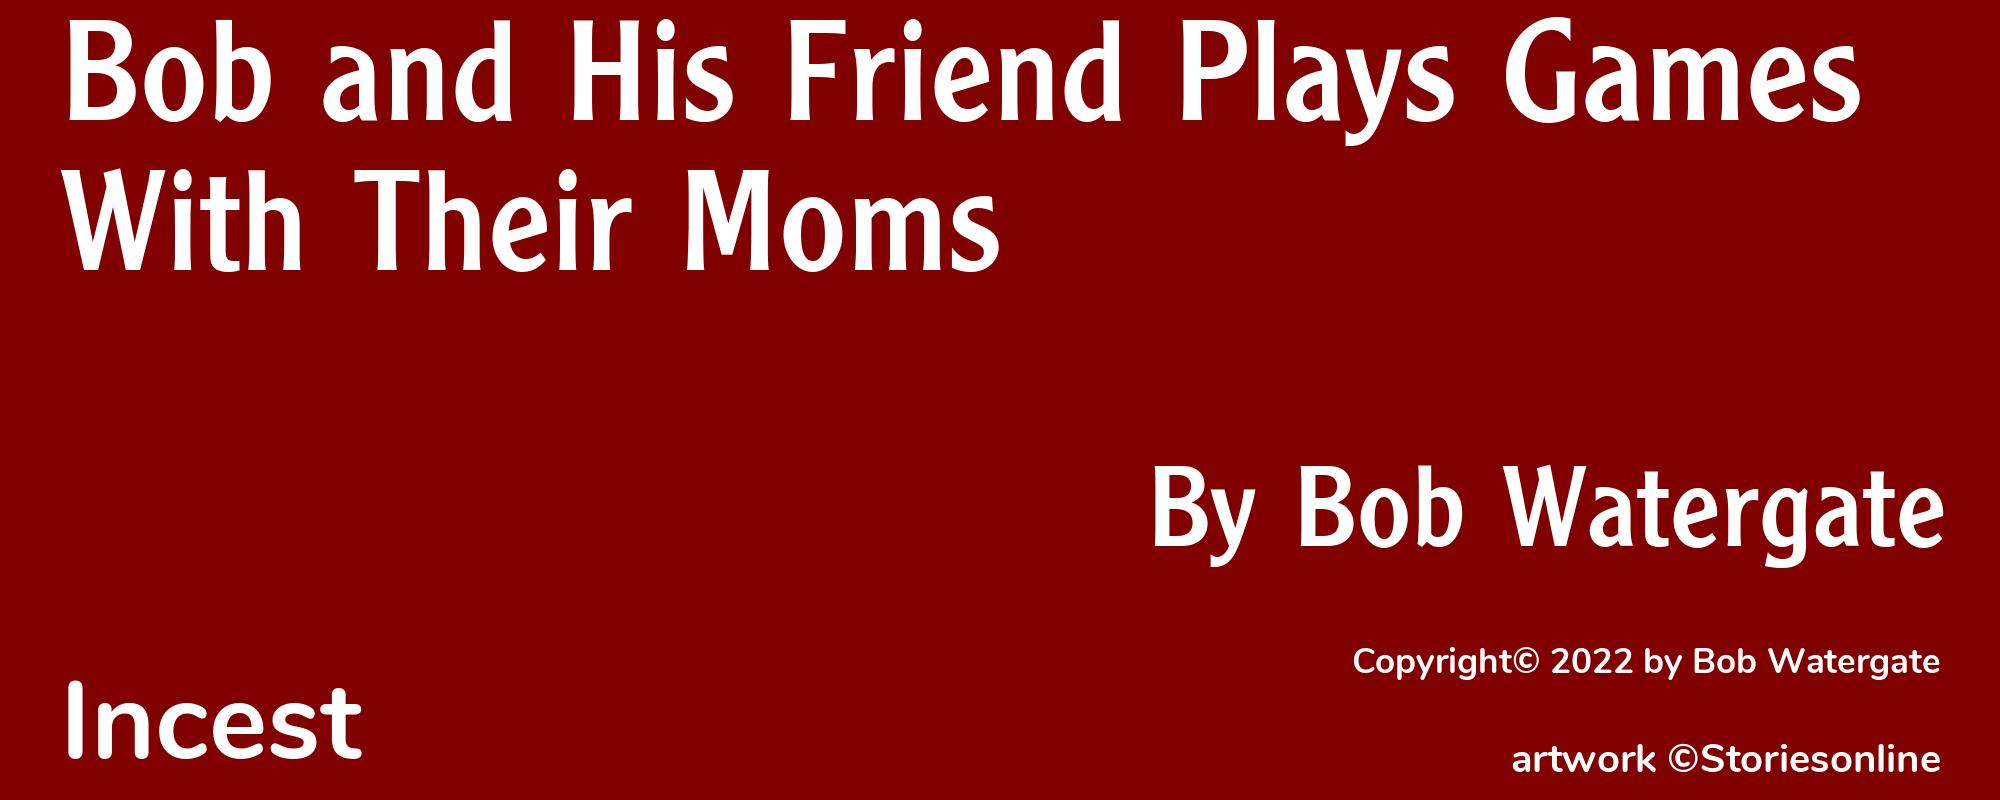 Bob and His Friend Plays Games With Their Moms - Cover